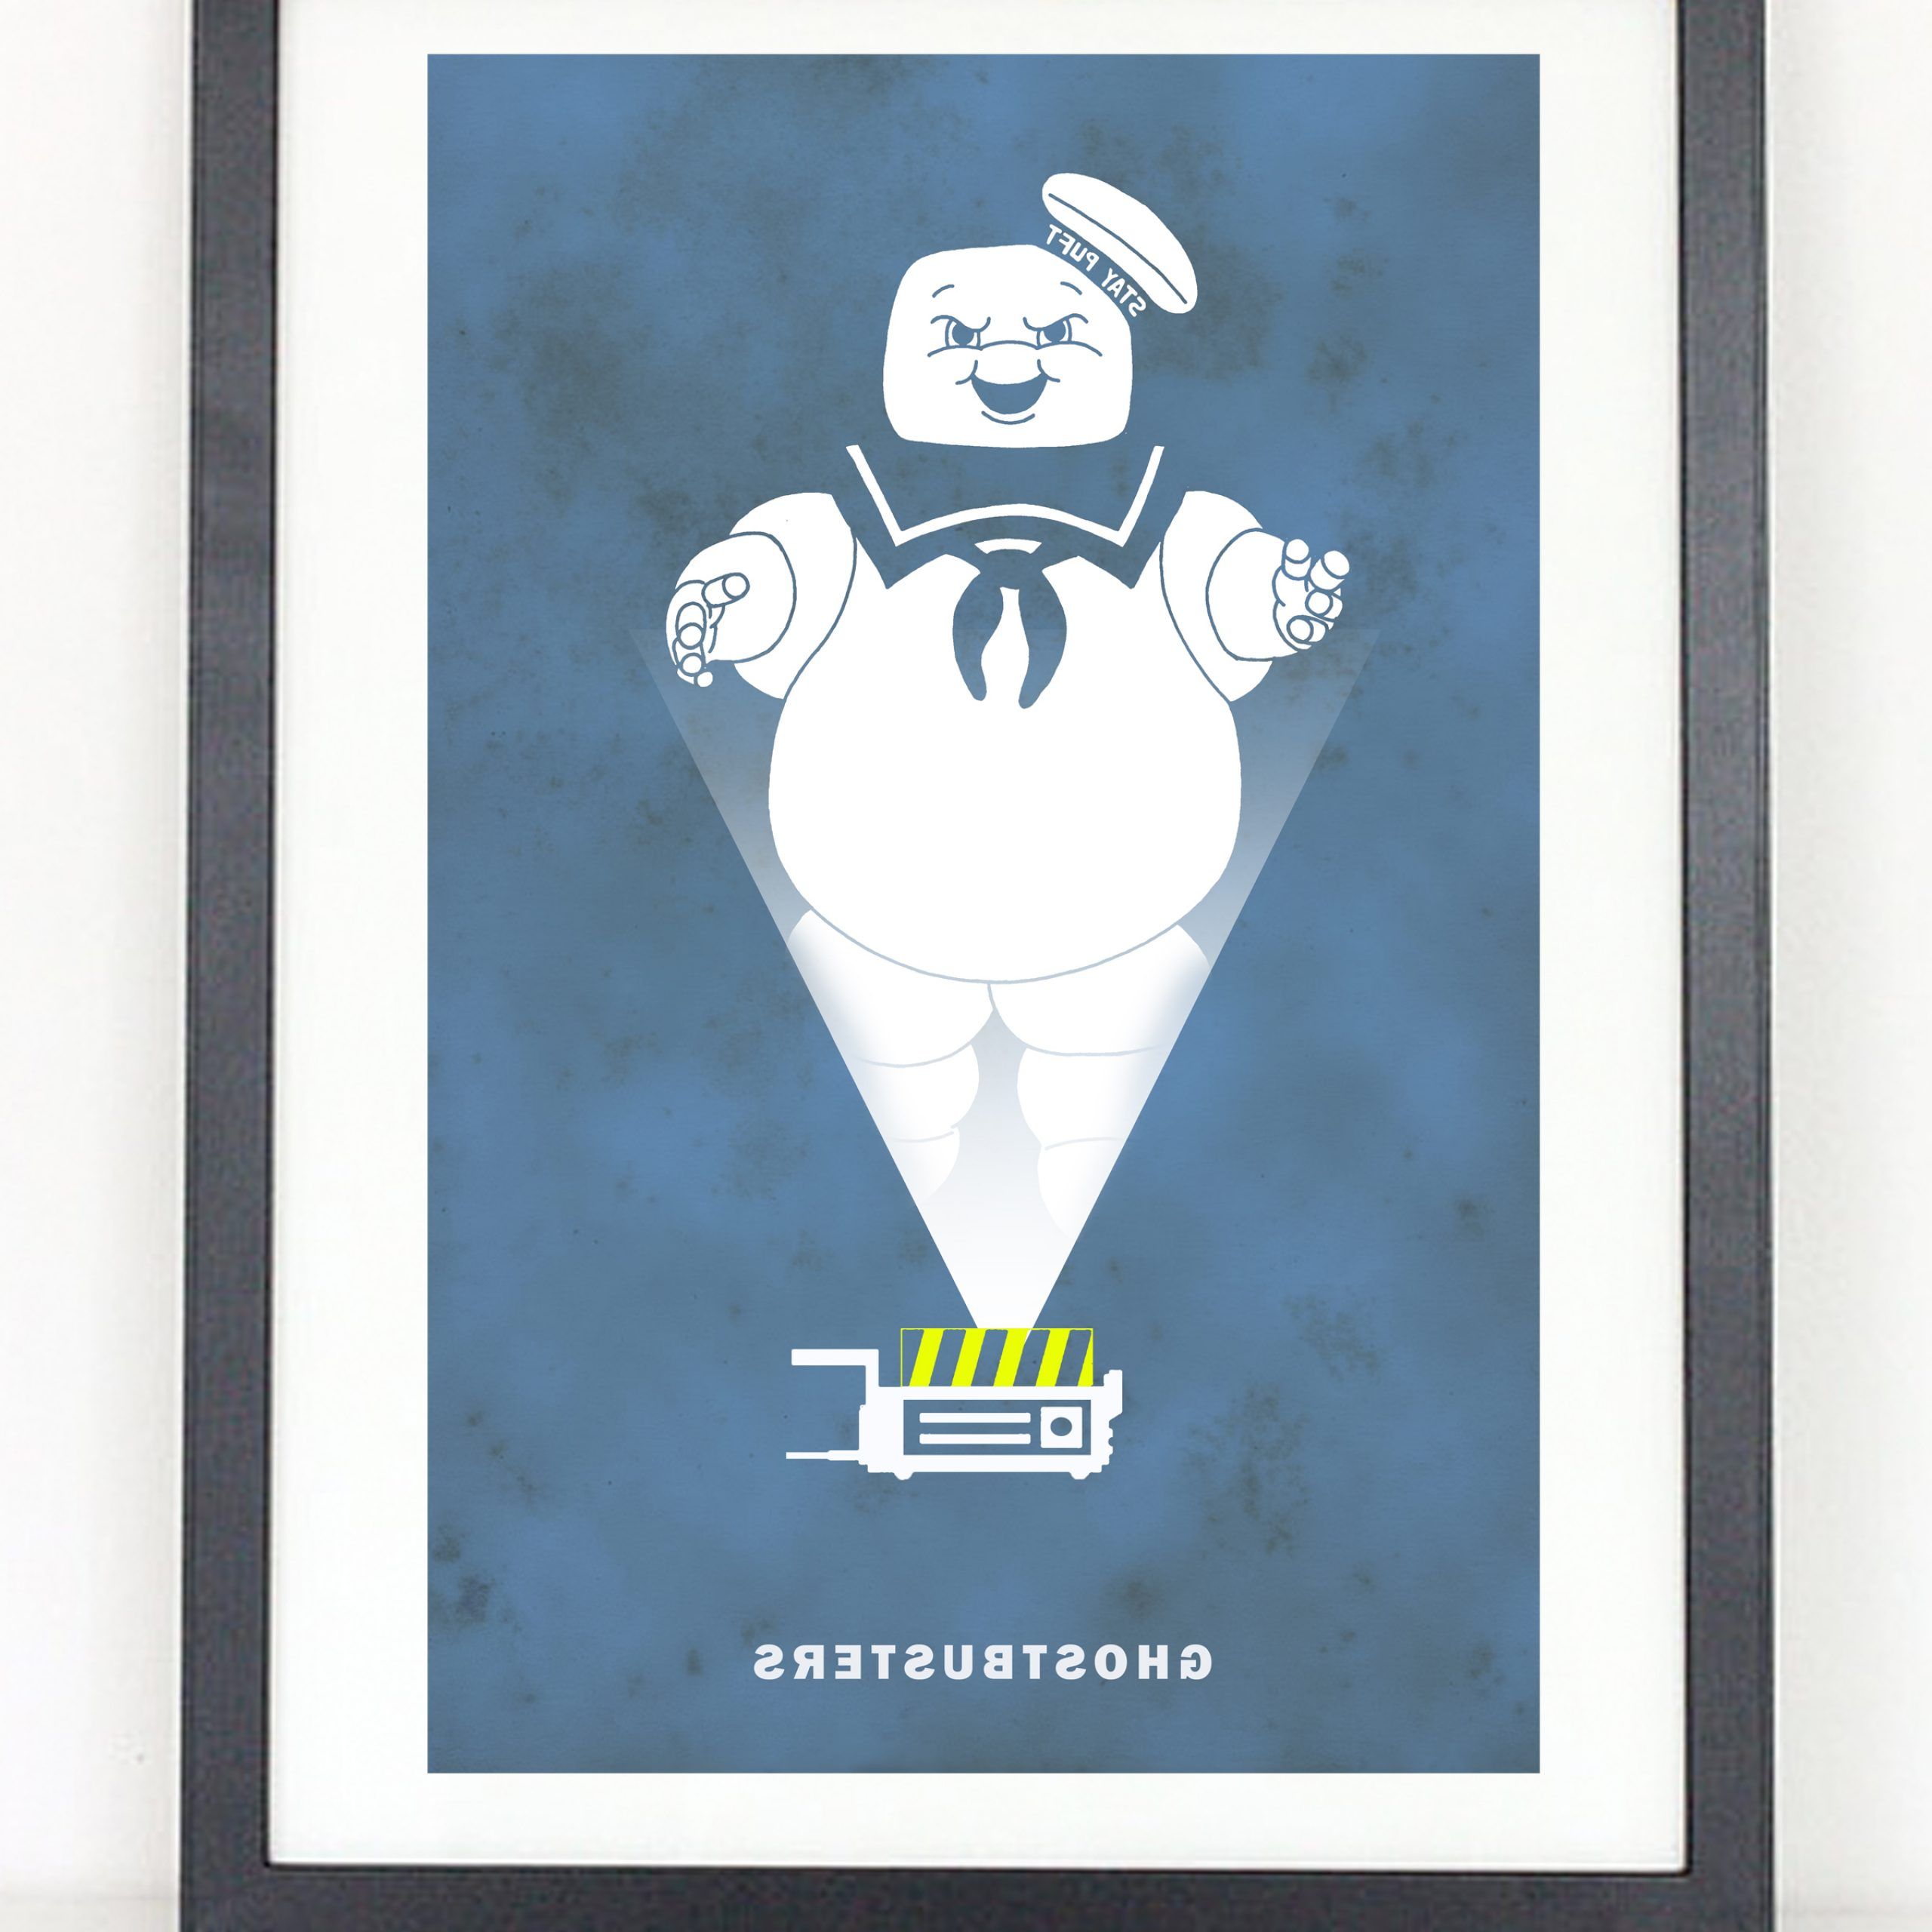 Ghostbusters Minimalist Poster Pertaining To Fashionable Minimalism Framed Art Prints (View 5 of 20)